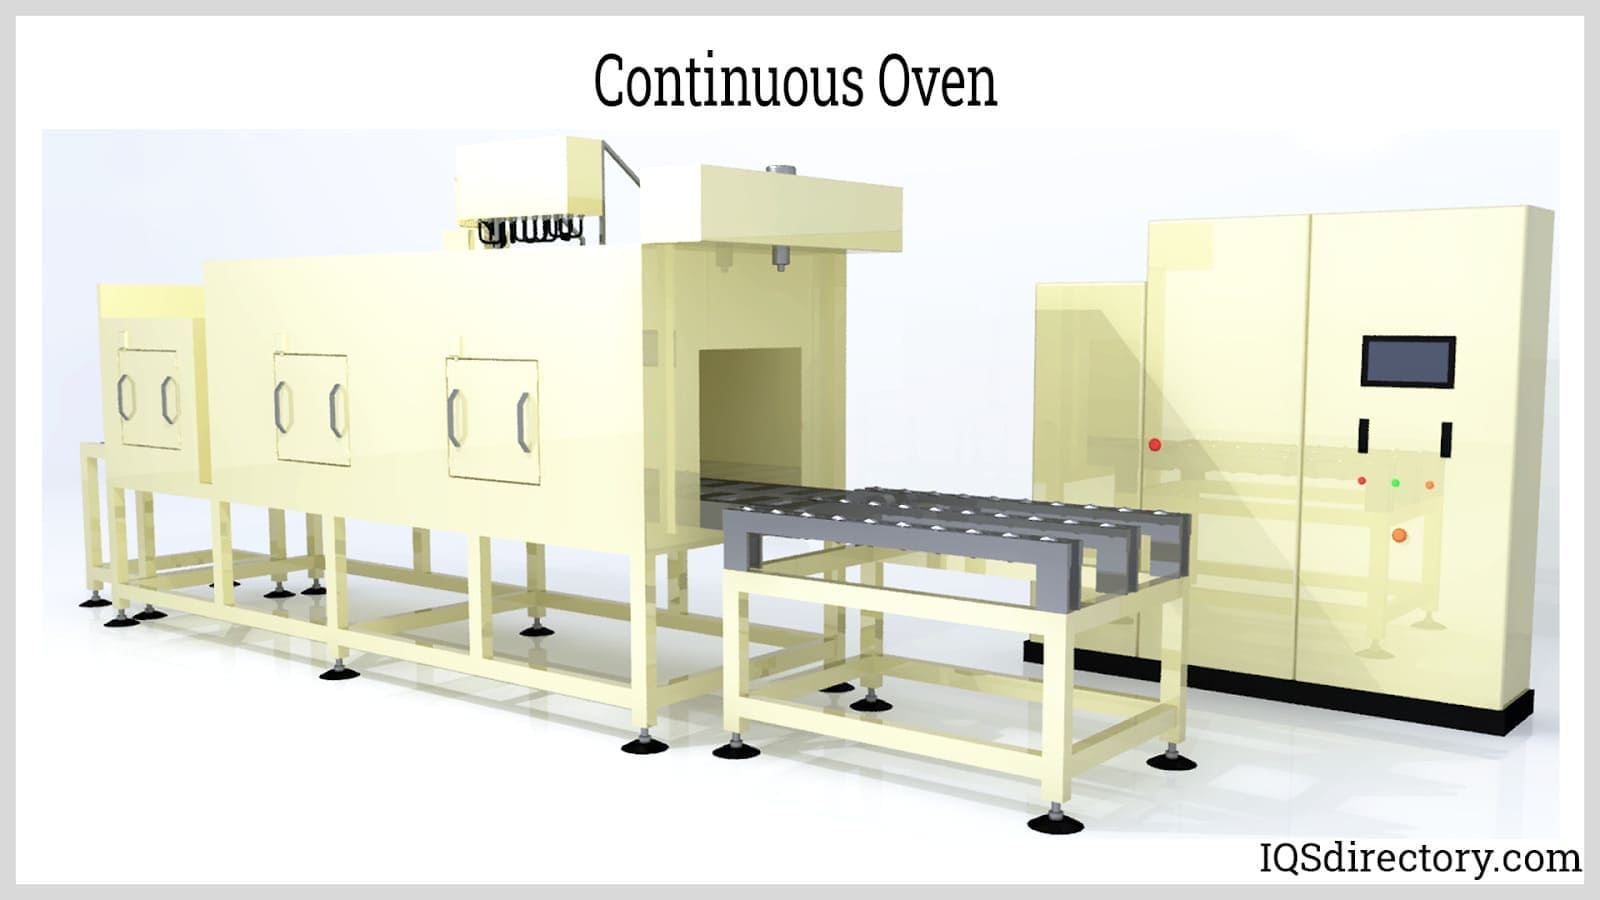 Continuous Ovens